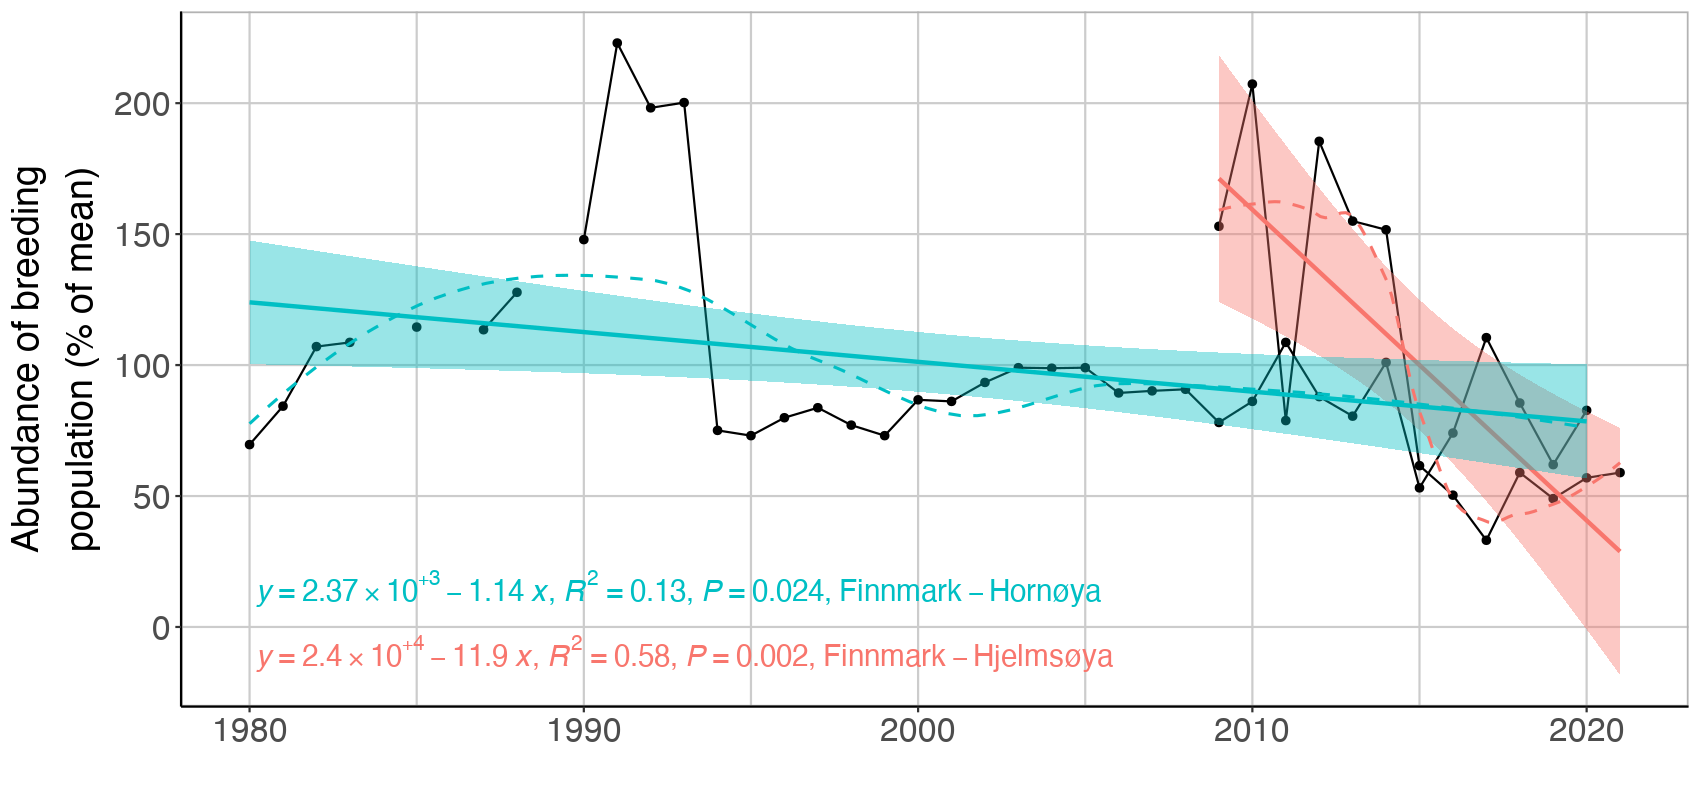 Figure S.8.3 Breeding population size of puffin (F. arctica) in colonies in Finnmark. Linear regression fit with 95% CI is shown as solid lines, and the statistical results are given at the bottom of the plot. A local smoother is added as stippled lines to assist visual interpretation of non-linear changes during the period.